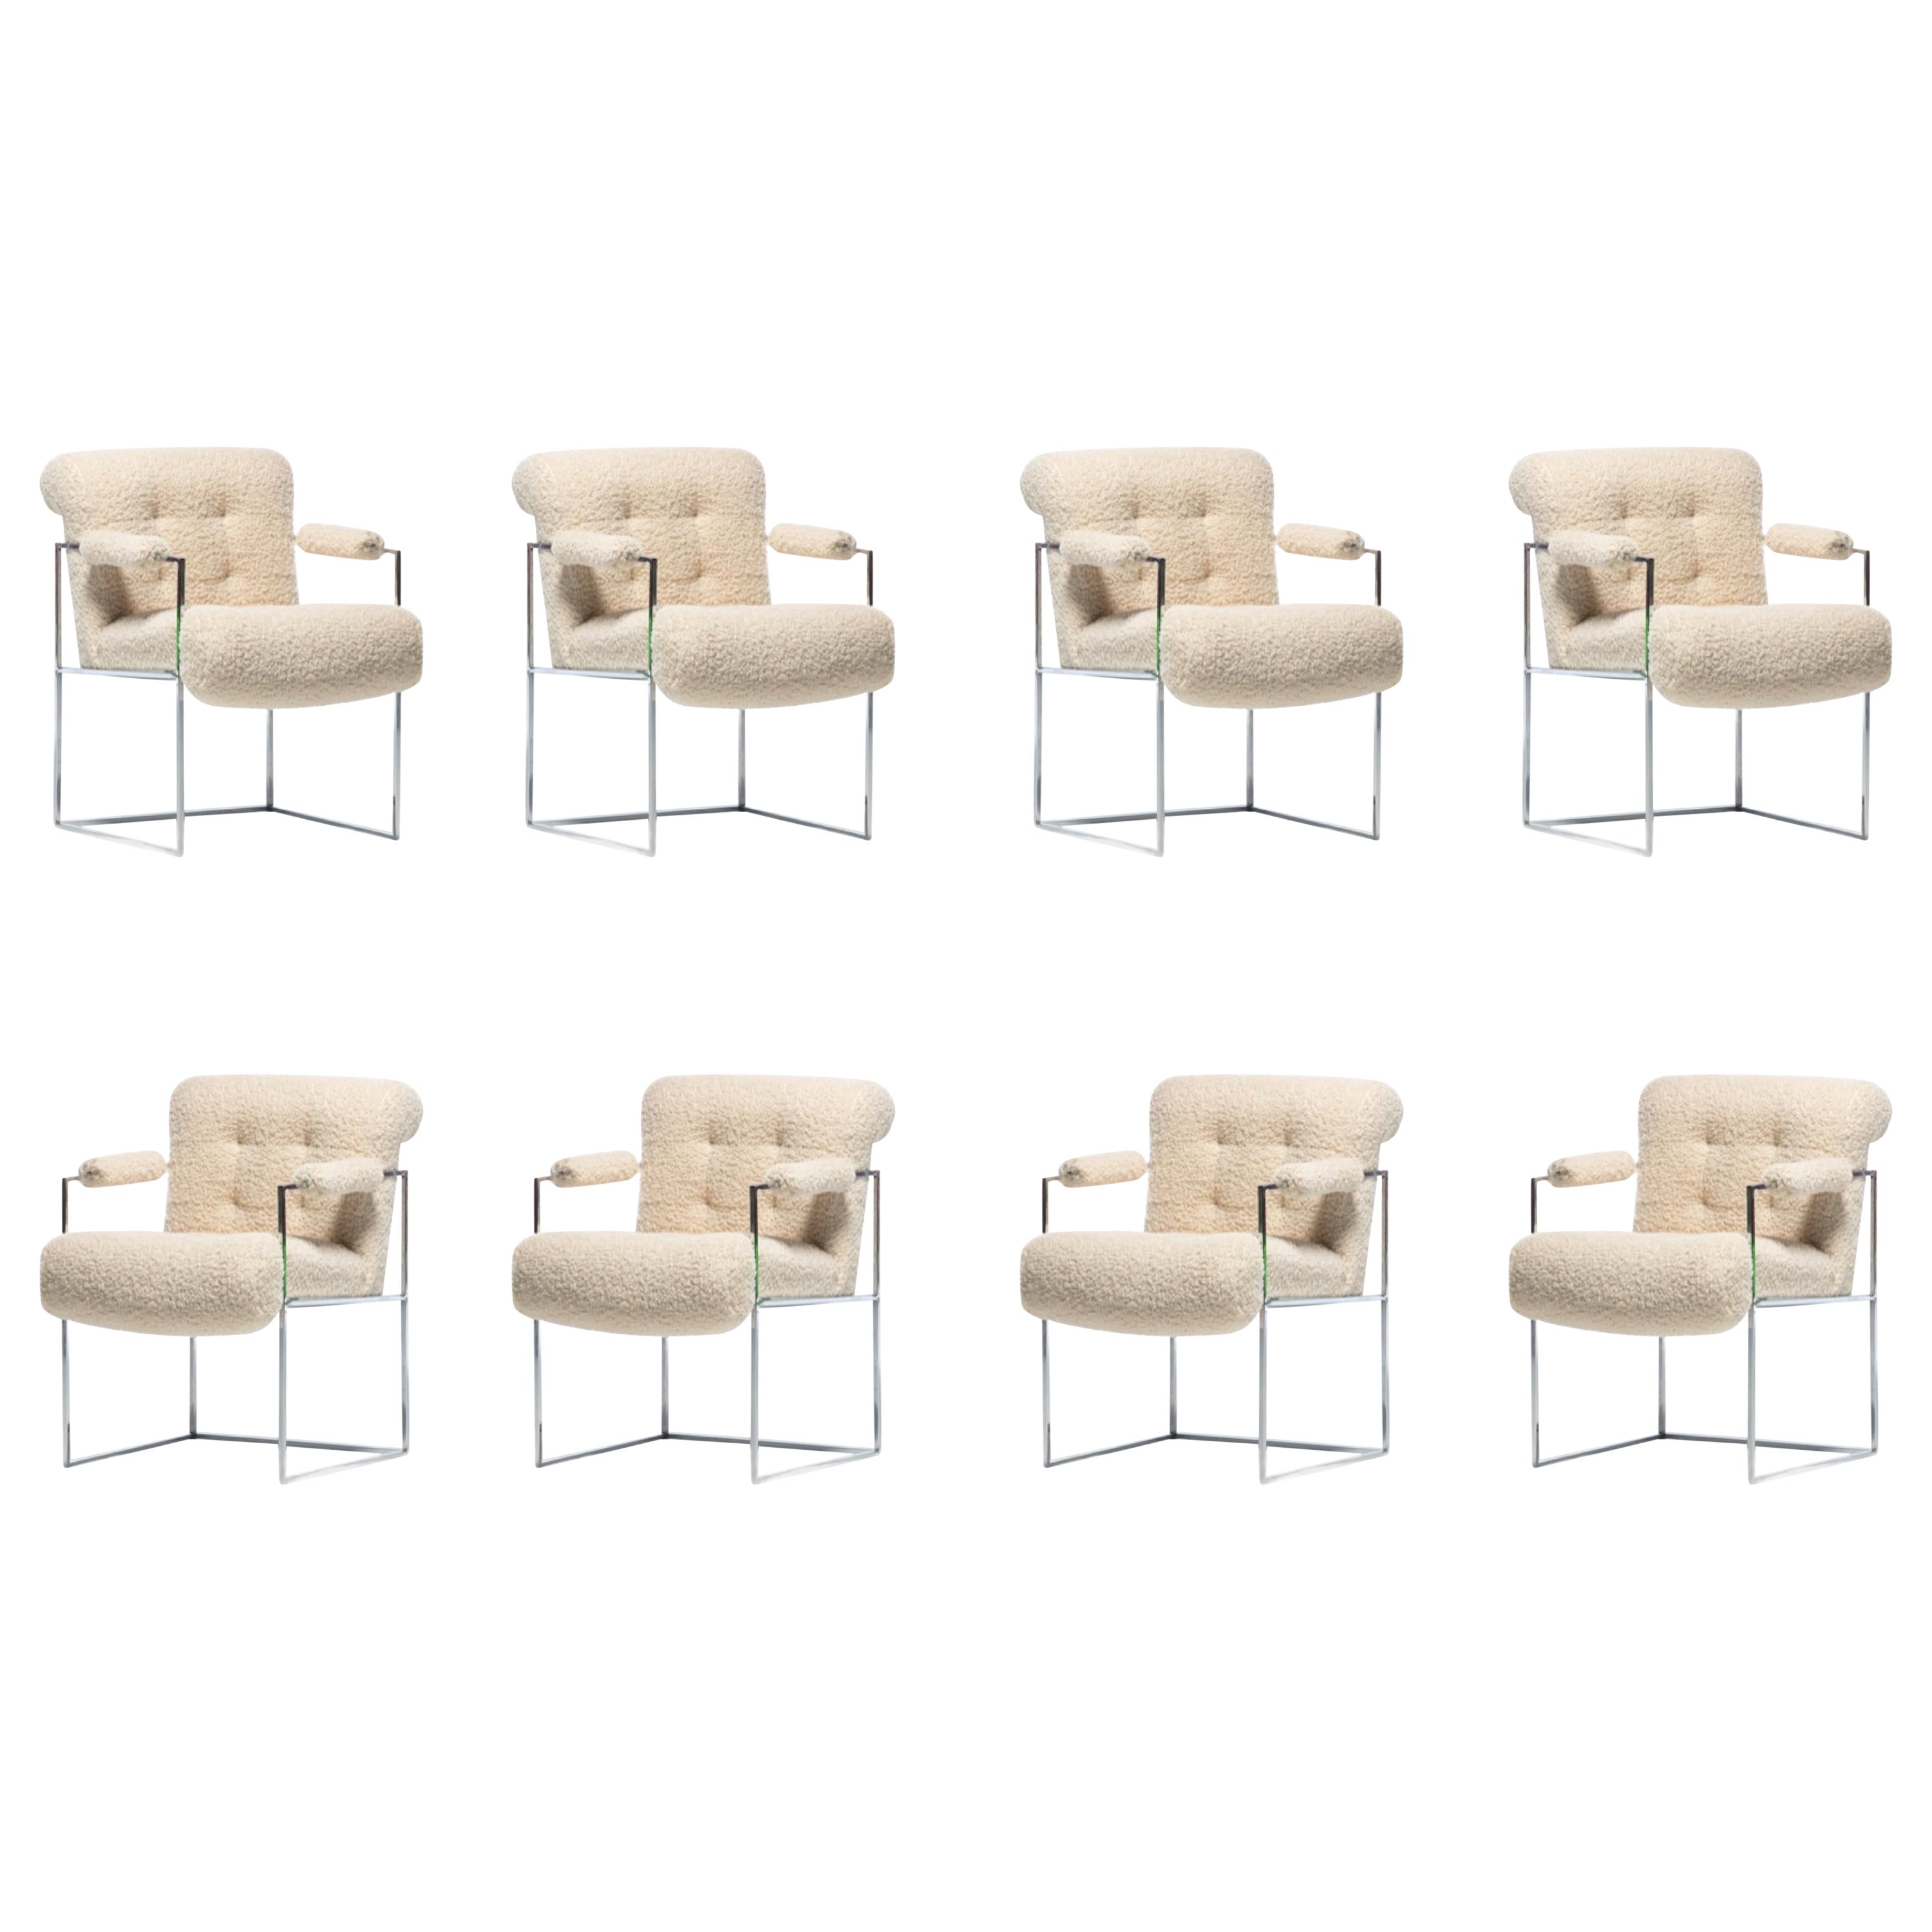 Milo Baughman Set of 8 Chrome Dining Chairs in Ivory Bouclé, c. 1975